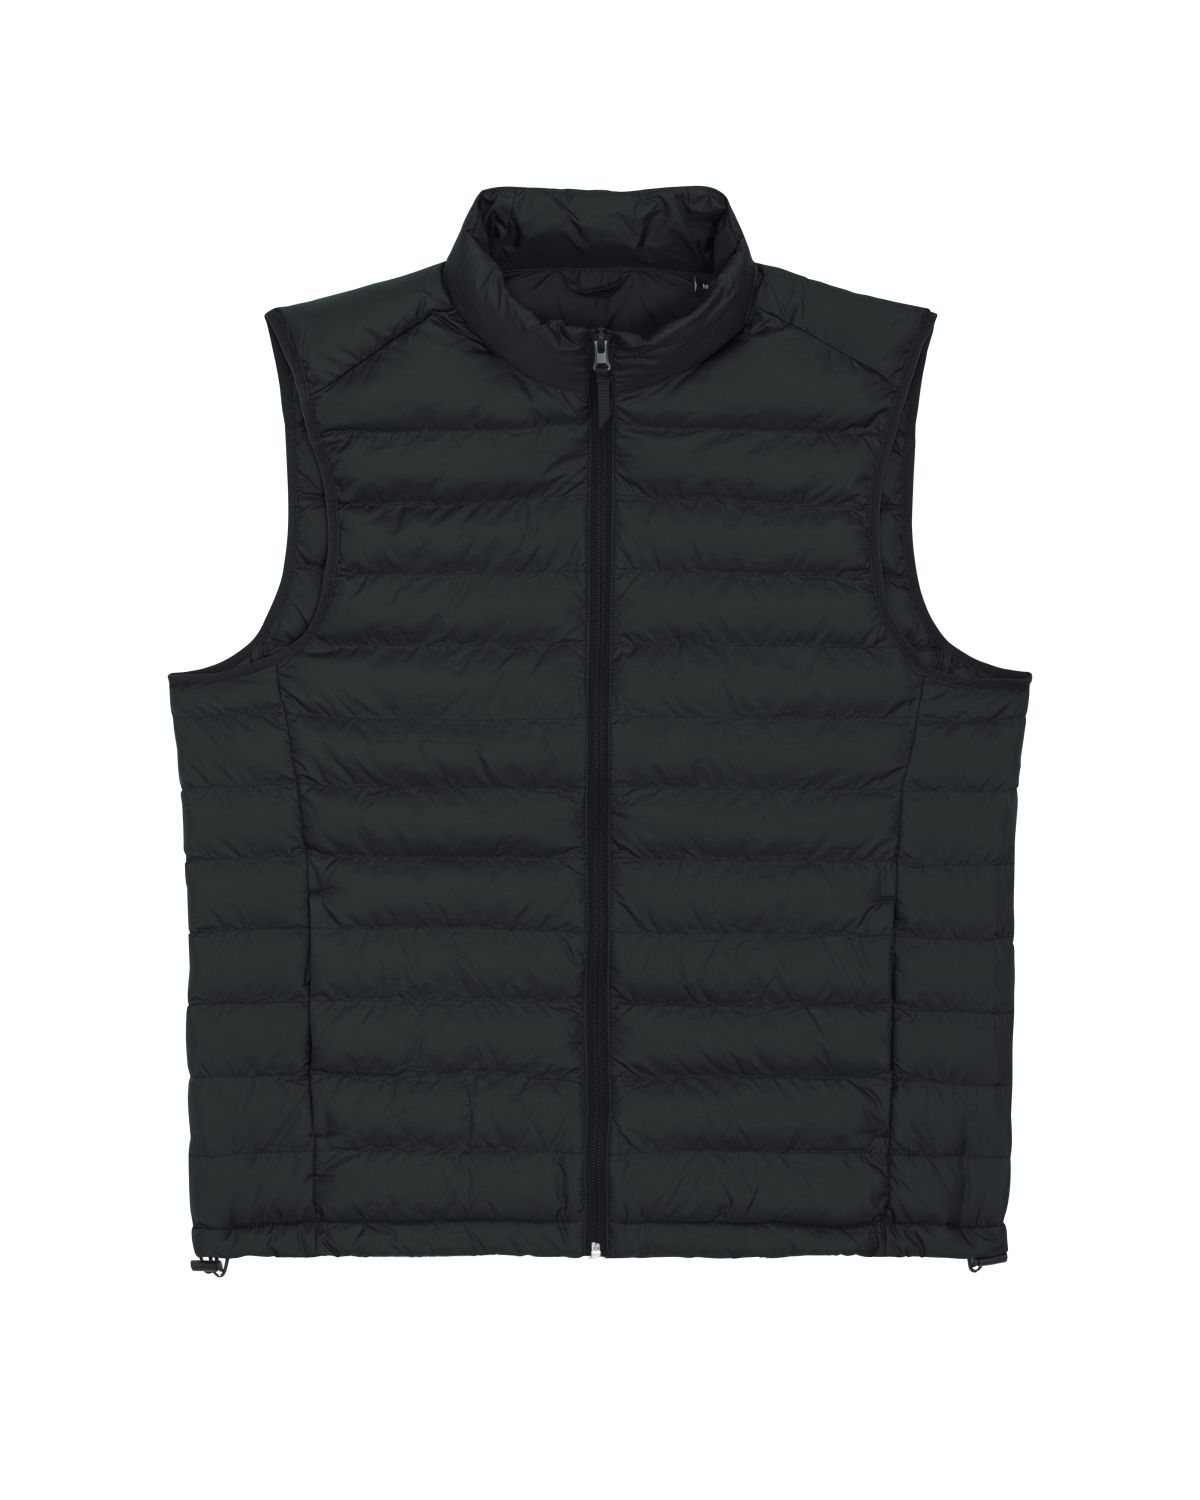 Customize your own vest